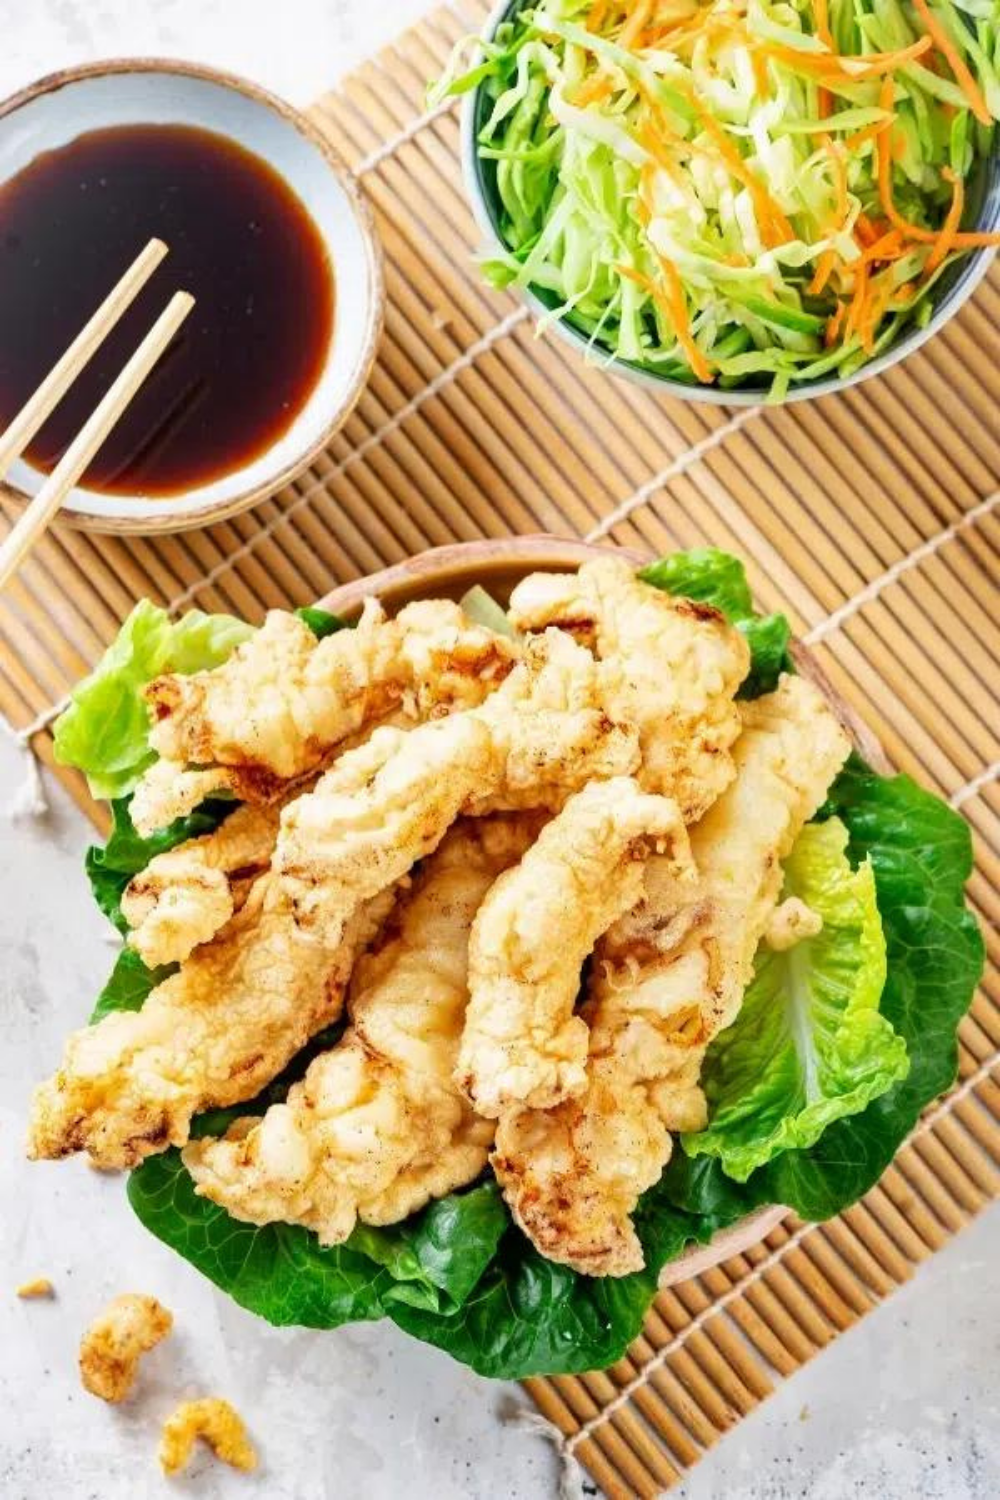 Chicken tempura on lettuce in a bowl on a straw place mat.